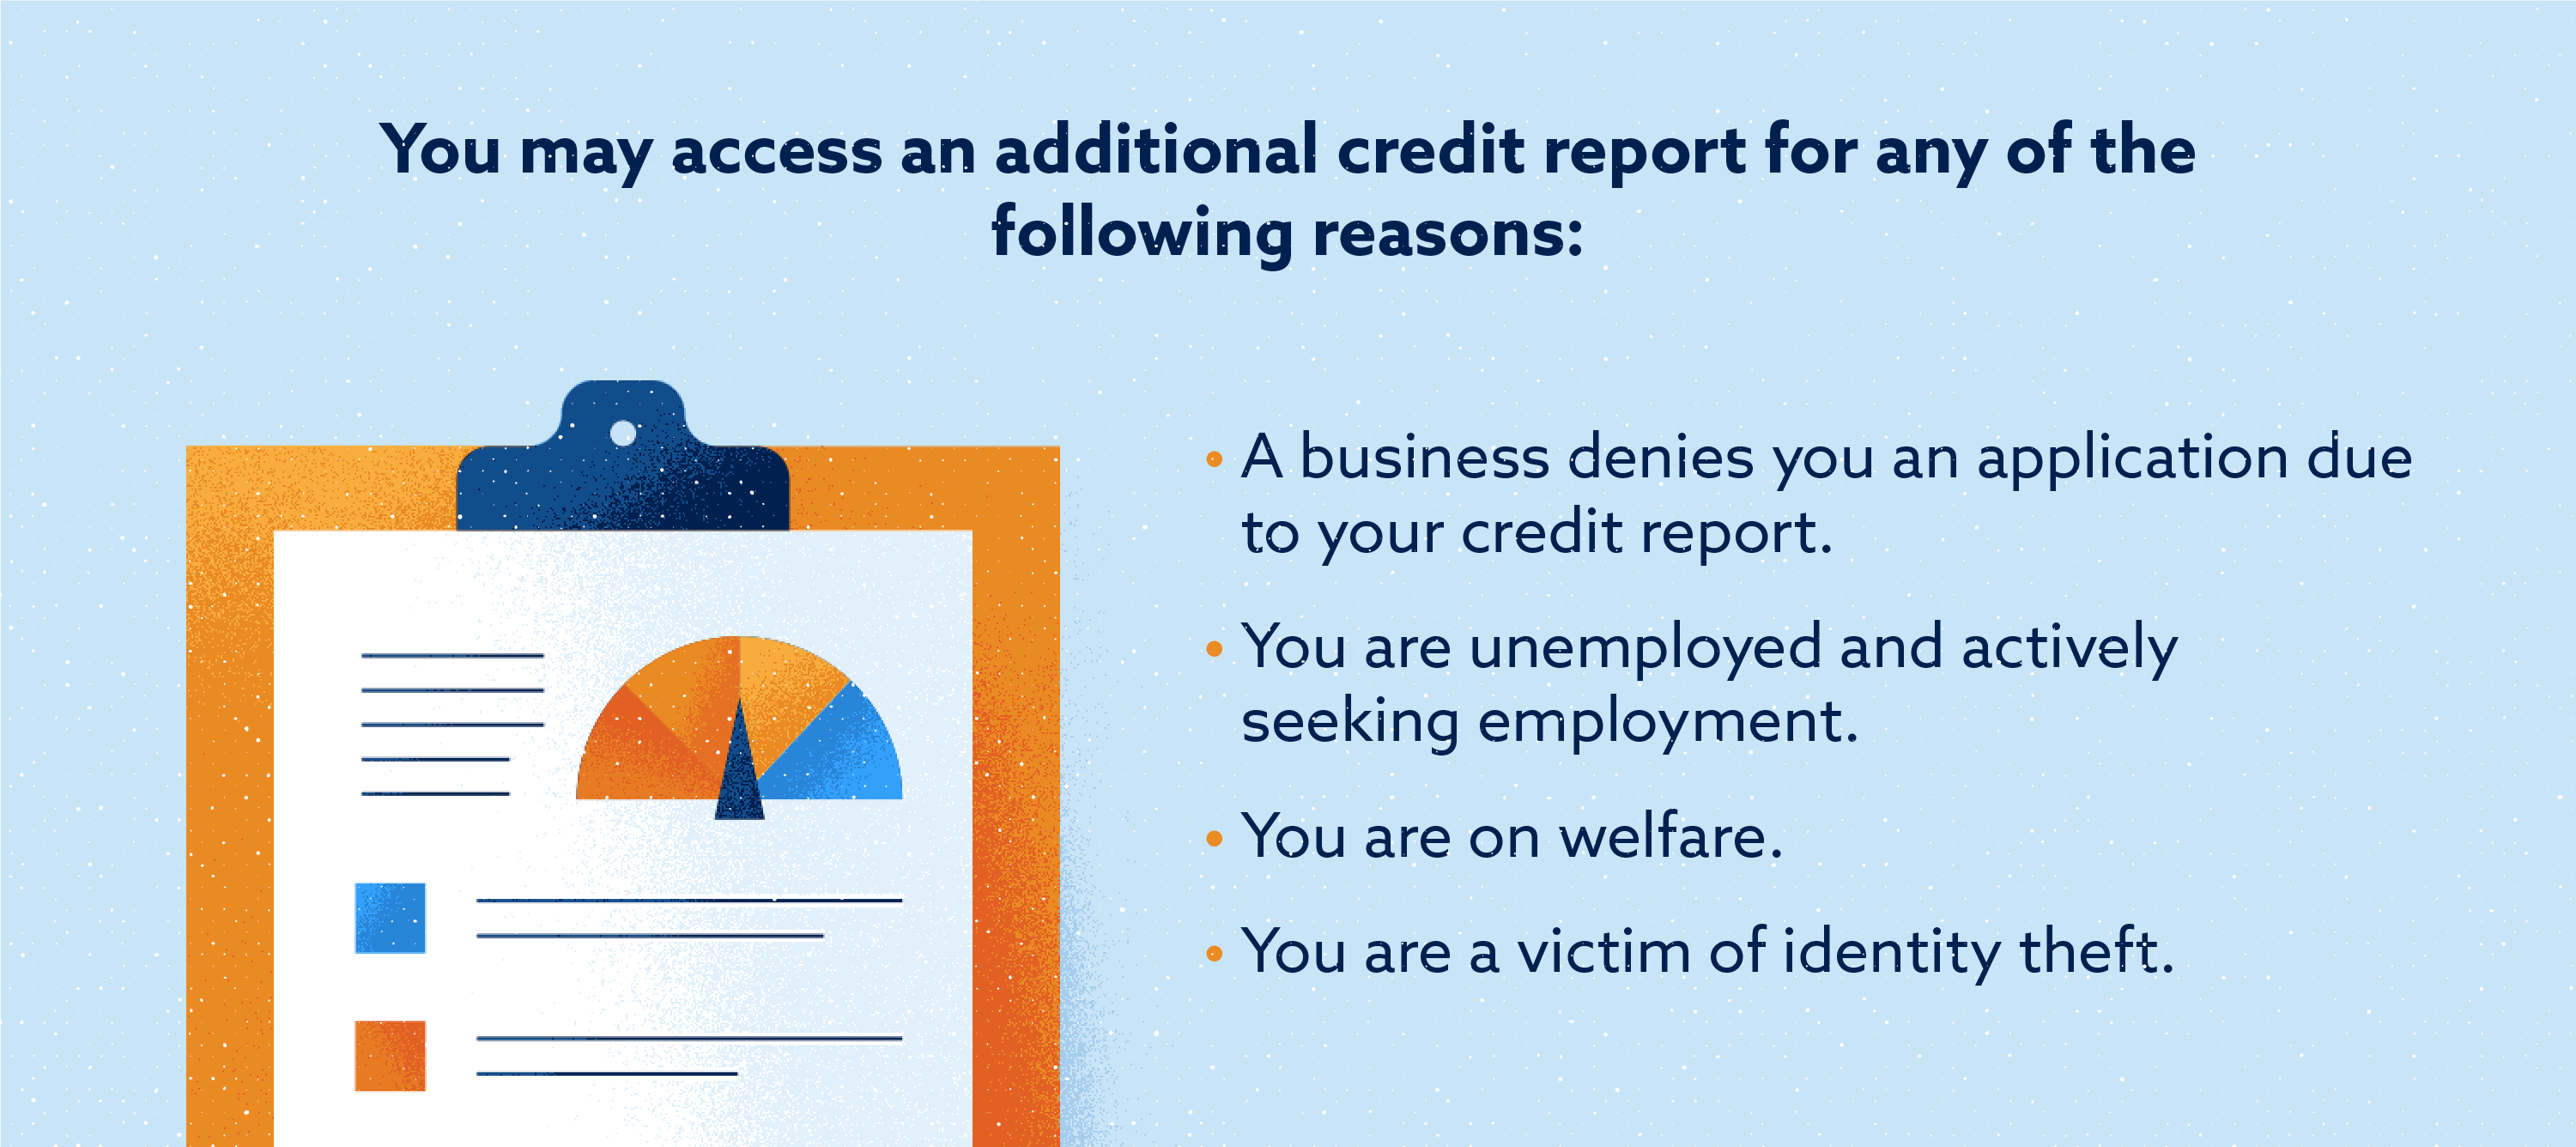 Reasons for accessing your credit report image